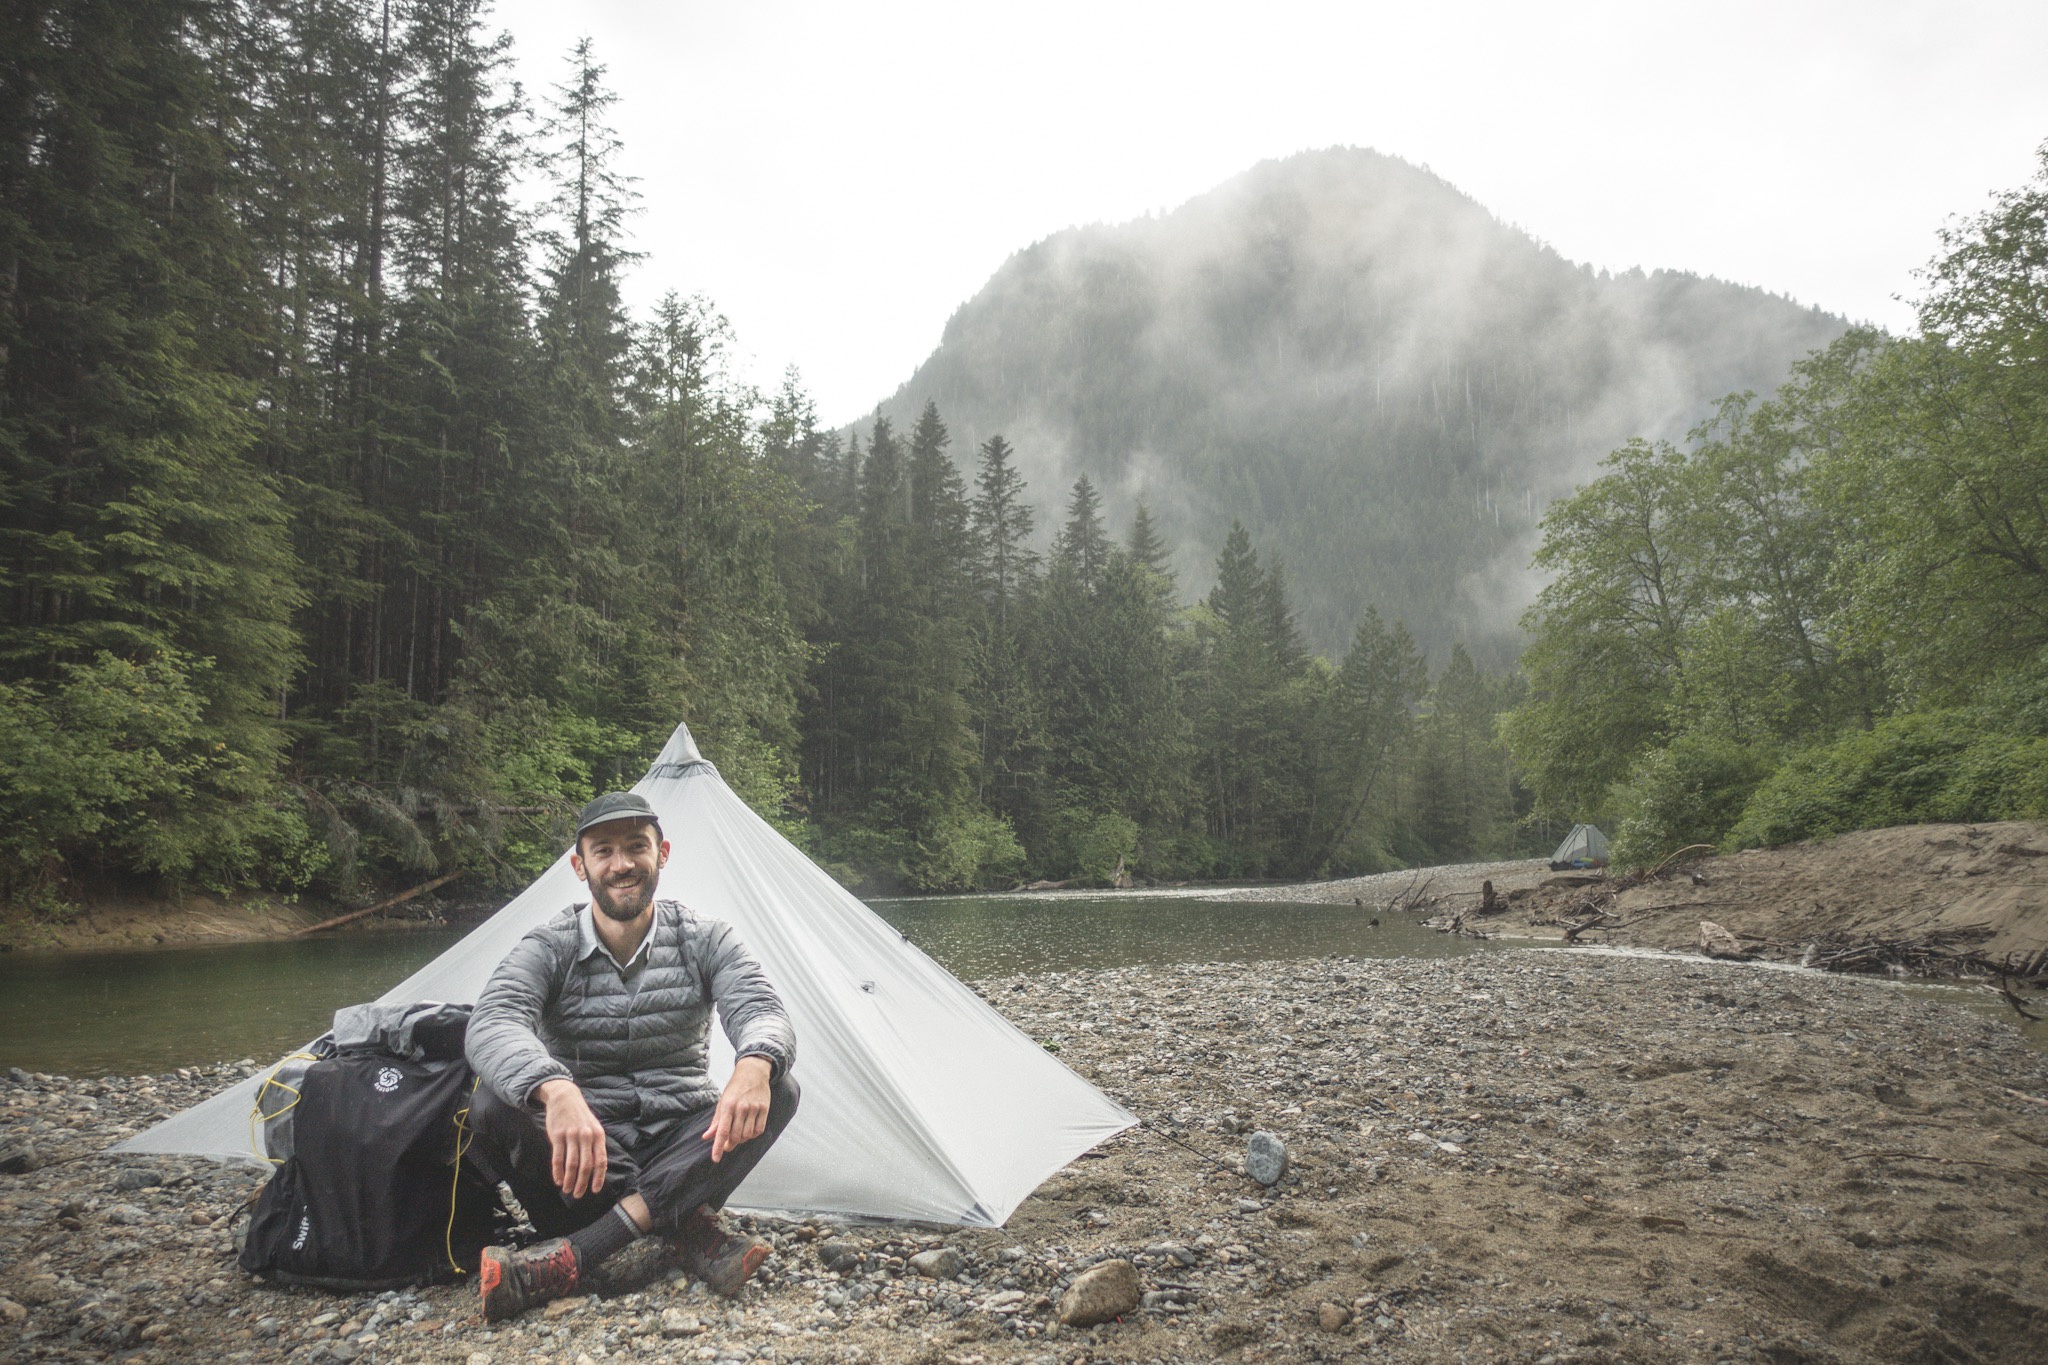 Lighten Up! Backpacking to Downsize - The Fisherman